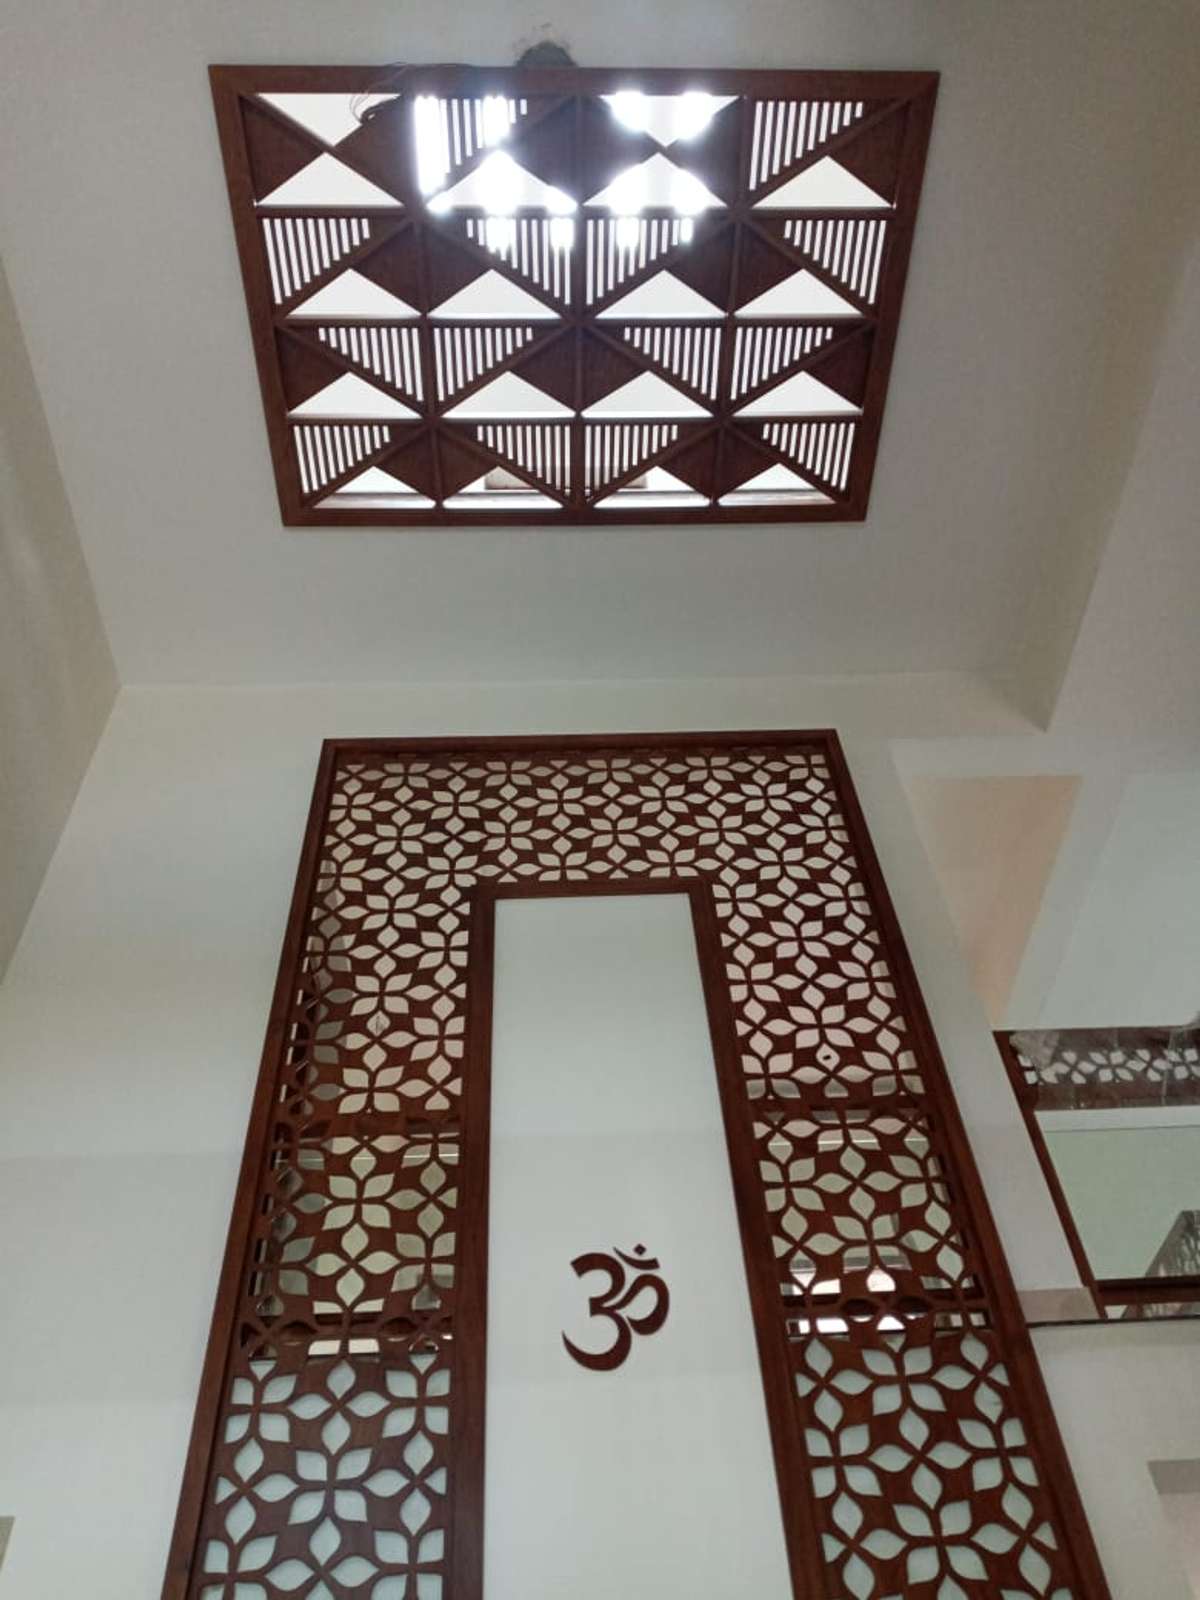 Ceiling, Wall Designs by Contractor dhineshtr Ramakershana, Thrissur | Kolo